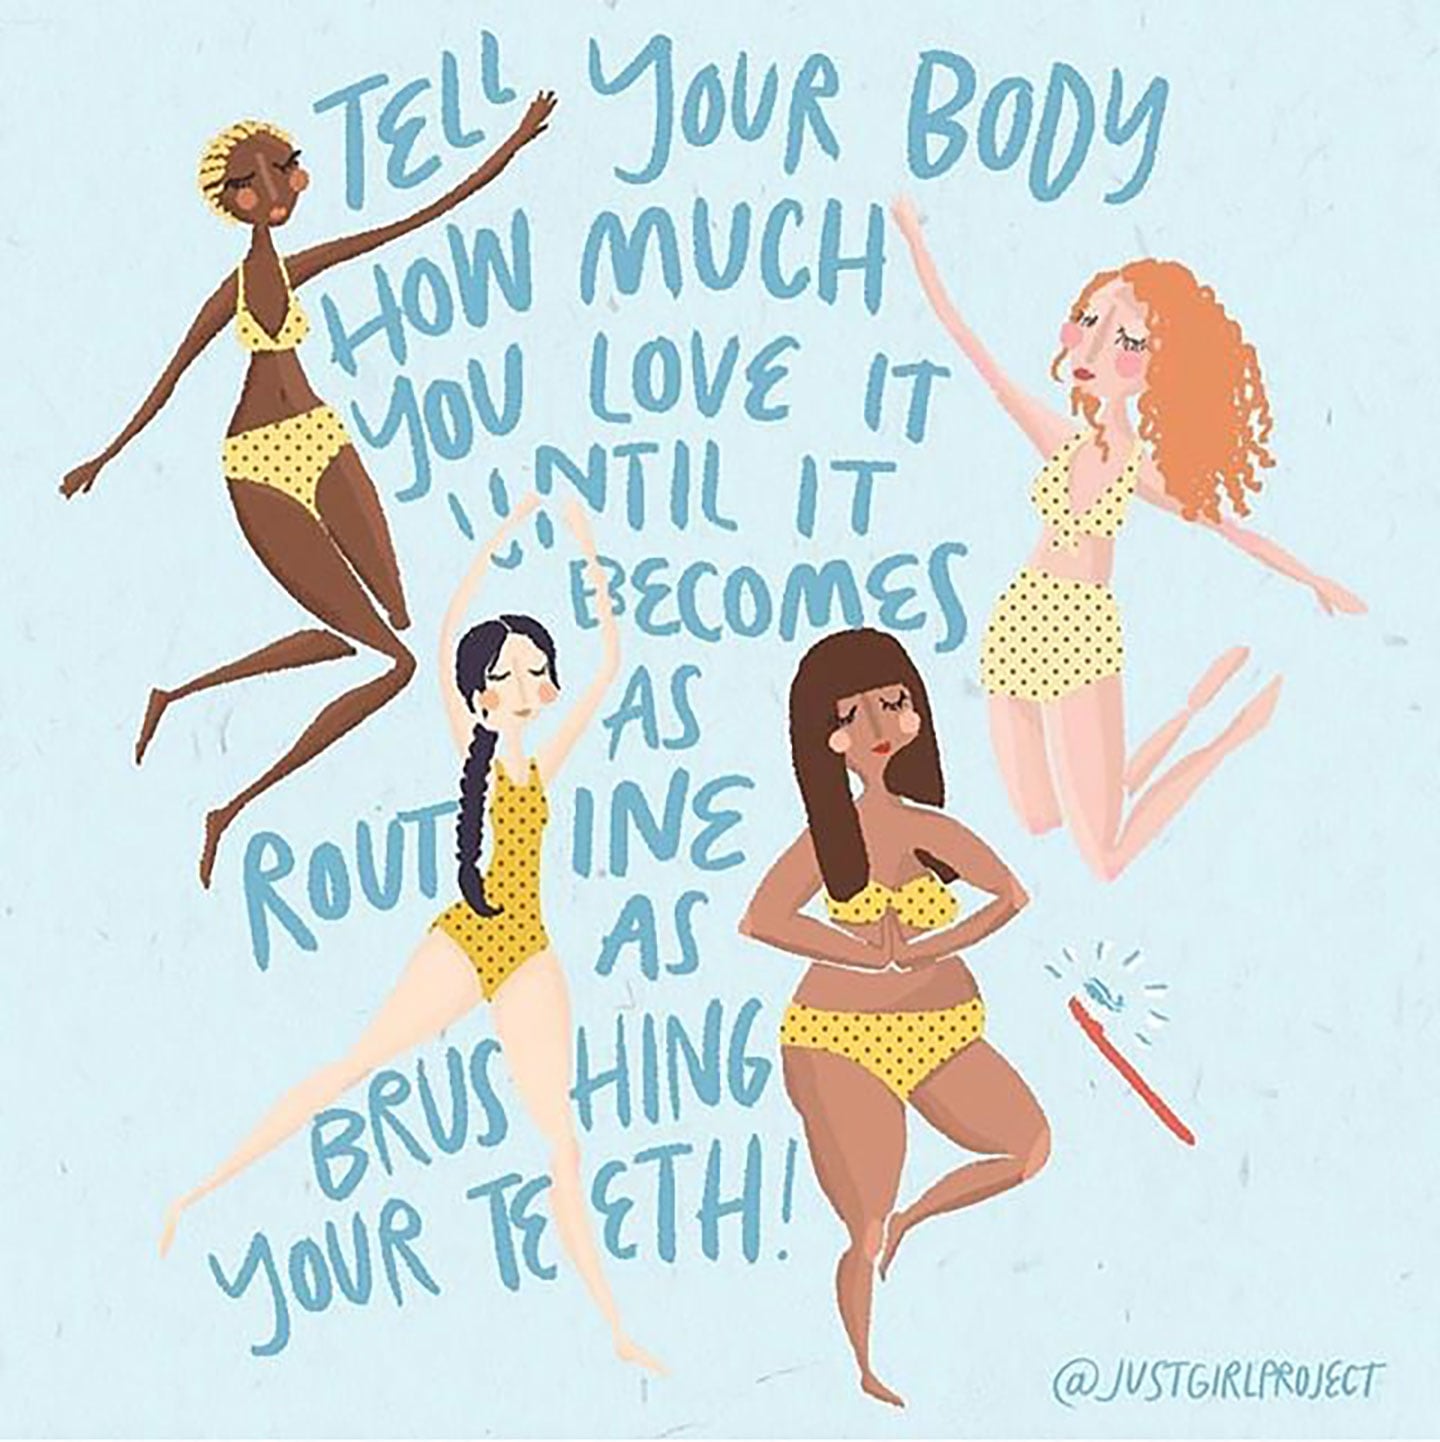 Body Positive Drawings And Quotes From Just Girl Project